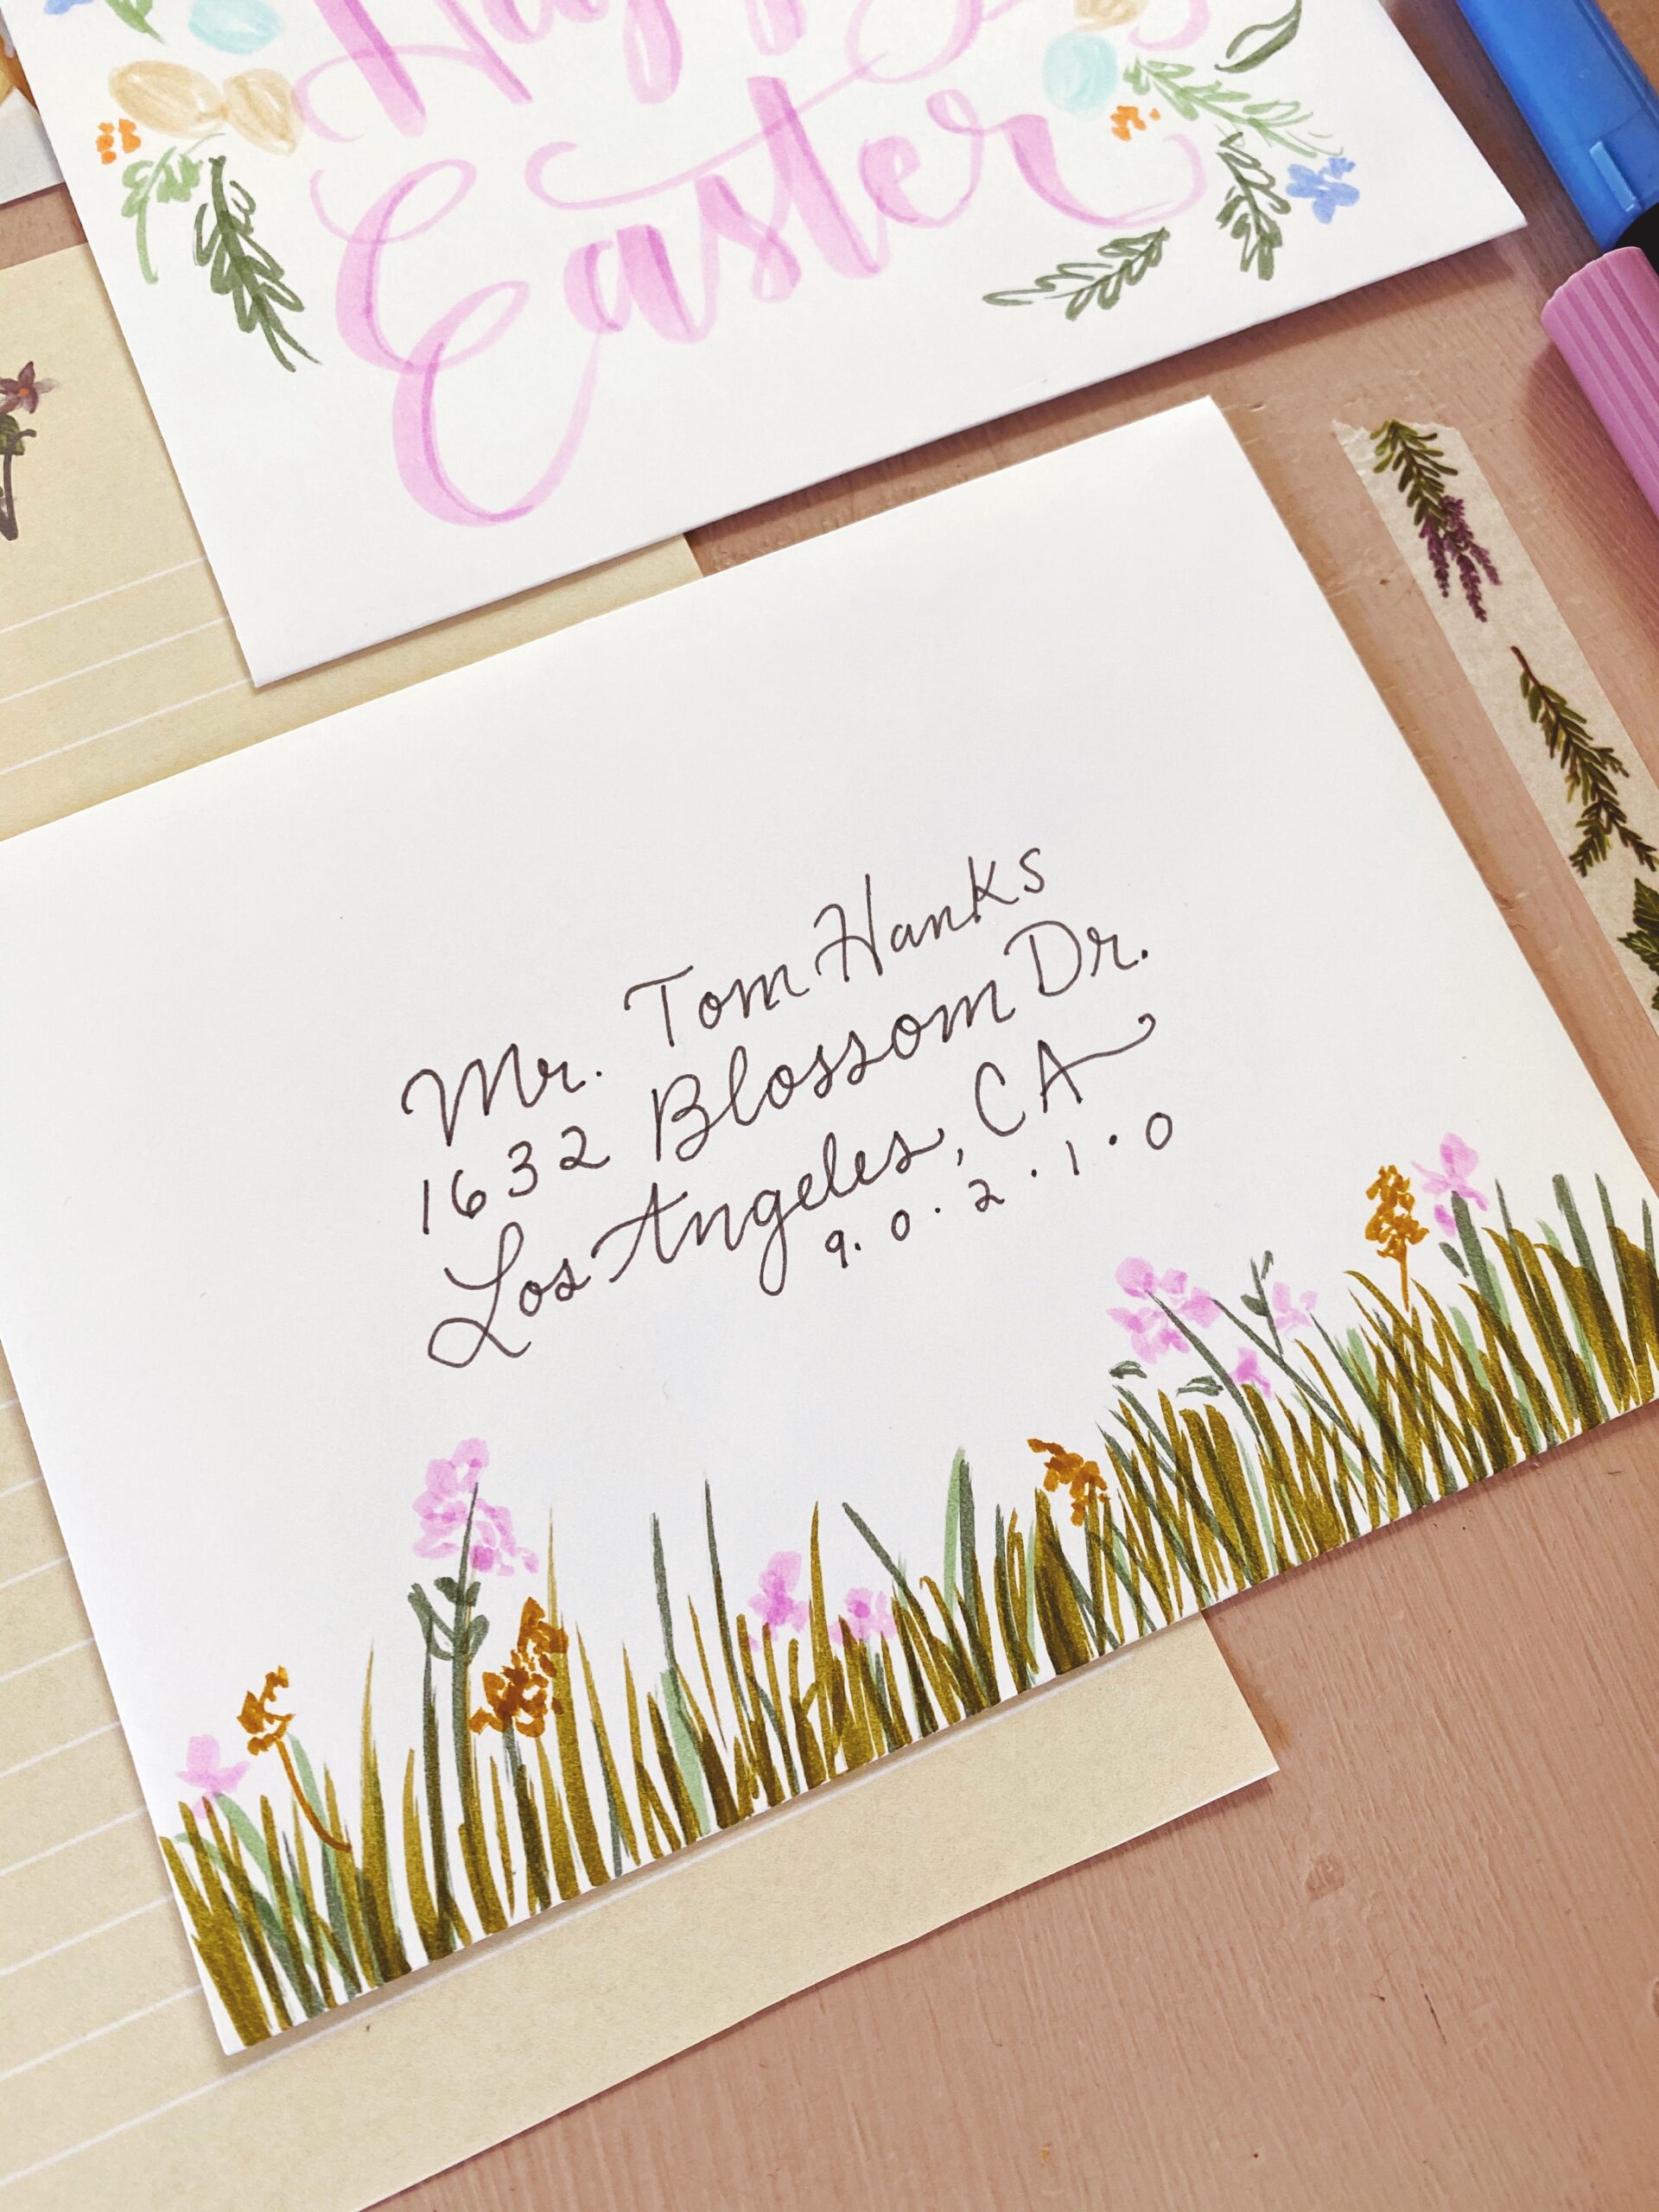 Easter Snail Mail Ideas for National Letter Writing Month | Mail art | Snail Mail Art | Letters